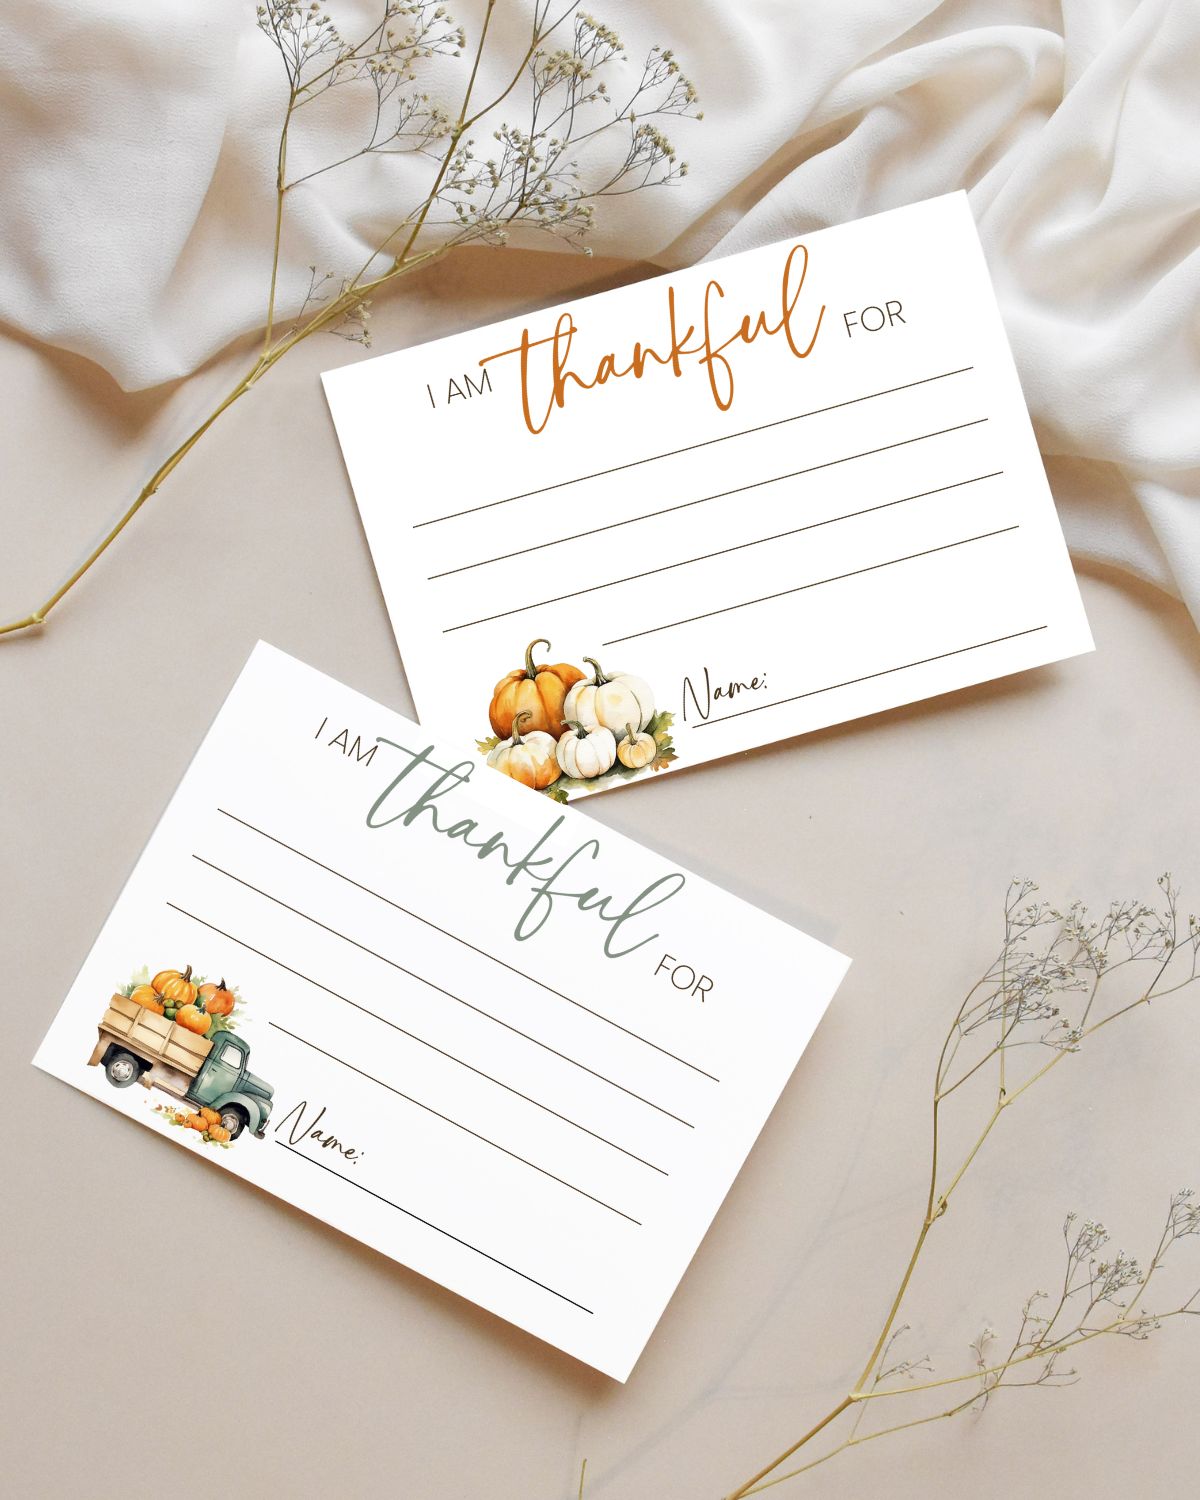 Free Thankful Cards to Share on Thanksgiving Day